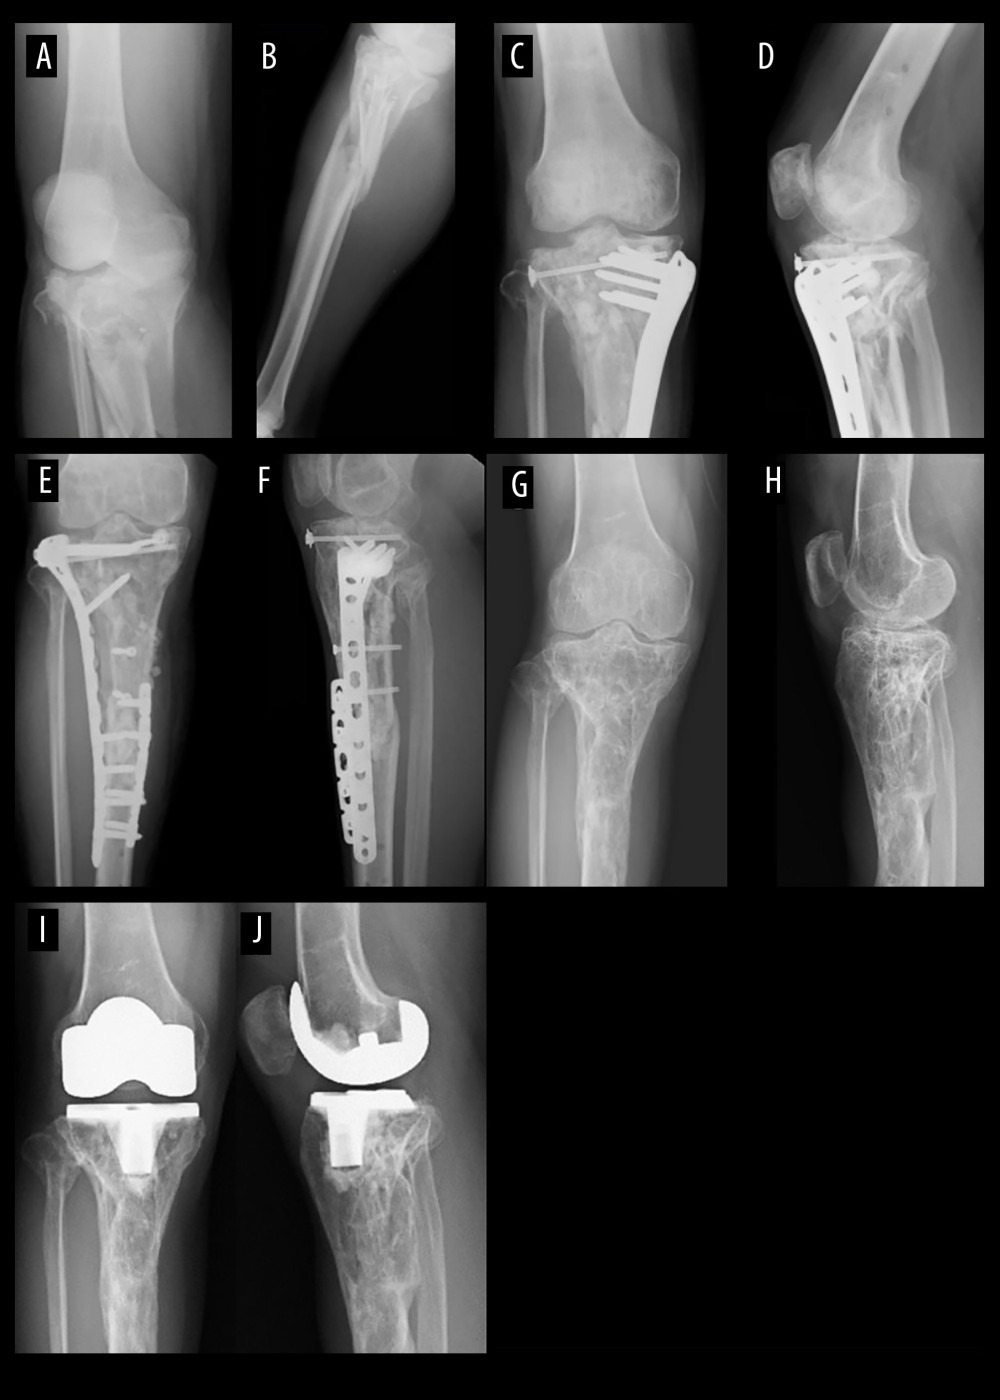 Case 3: Proximal tibial fracture to TKA X-rays. (A, B) Anteroposterior (AP) and lateral radiographs of initial injury. (C, D) AP and lateral radiographs of proximal tibial fracture treated with primary open reduction and internal fixation. (E, F) AP and lateral radiographs of reoperation for infected nonunion. (G, H) AP and lateral radiographs after screw and plate removal and before total knee arthroplasty (TKA). (I, J) AP and lateral radiographs after TKA.